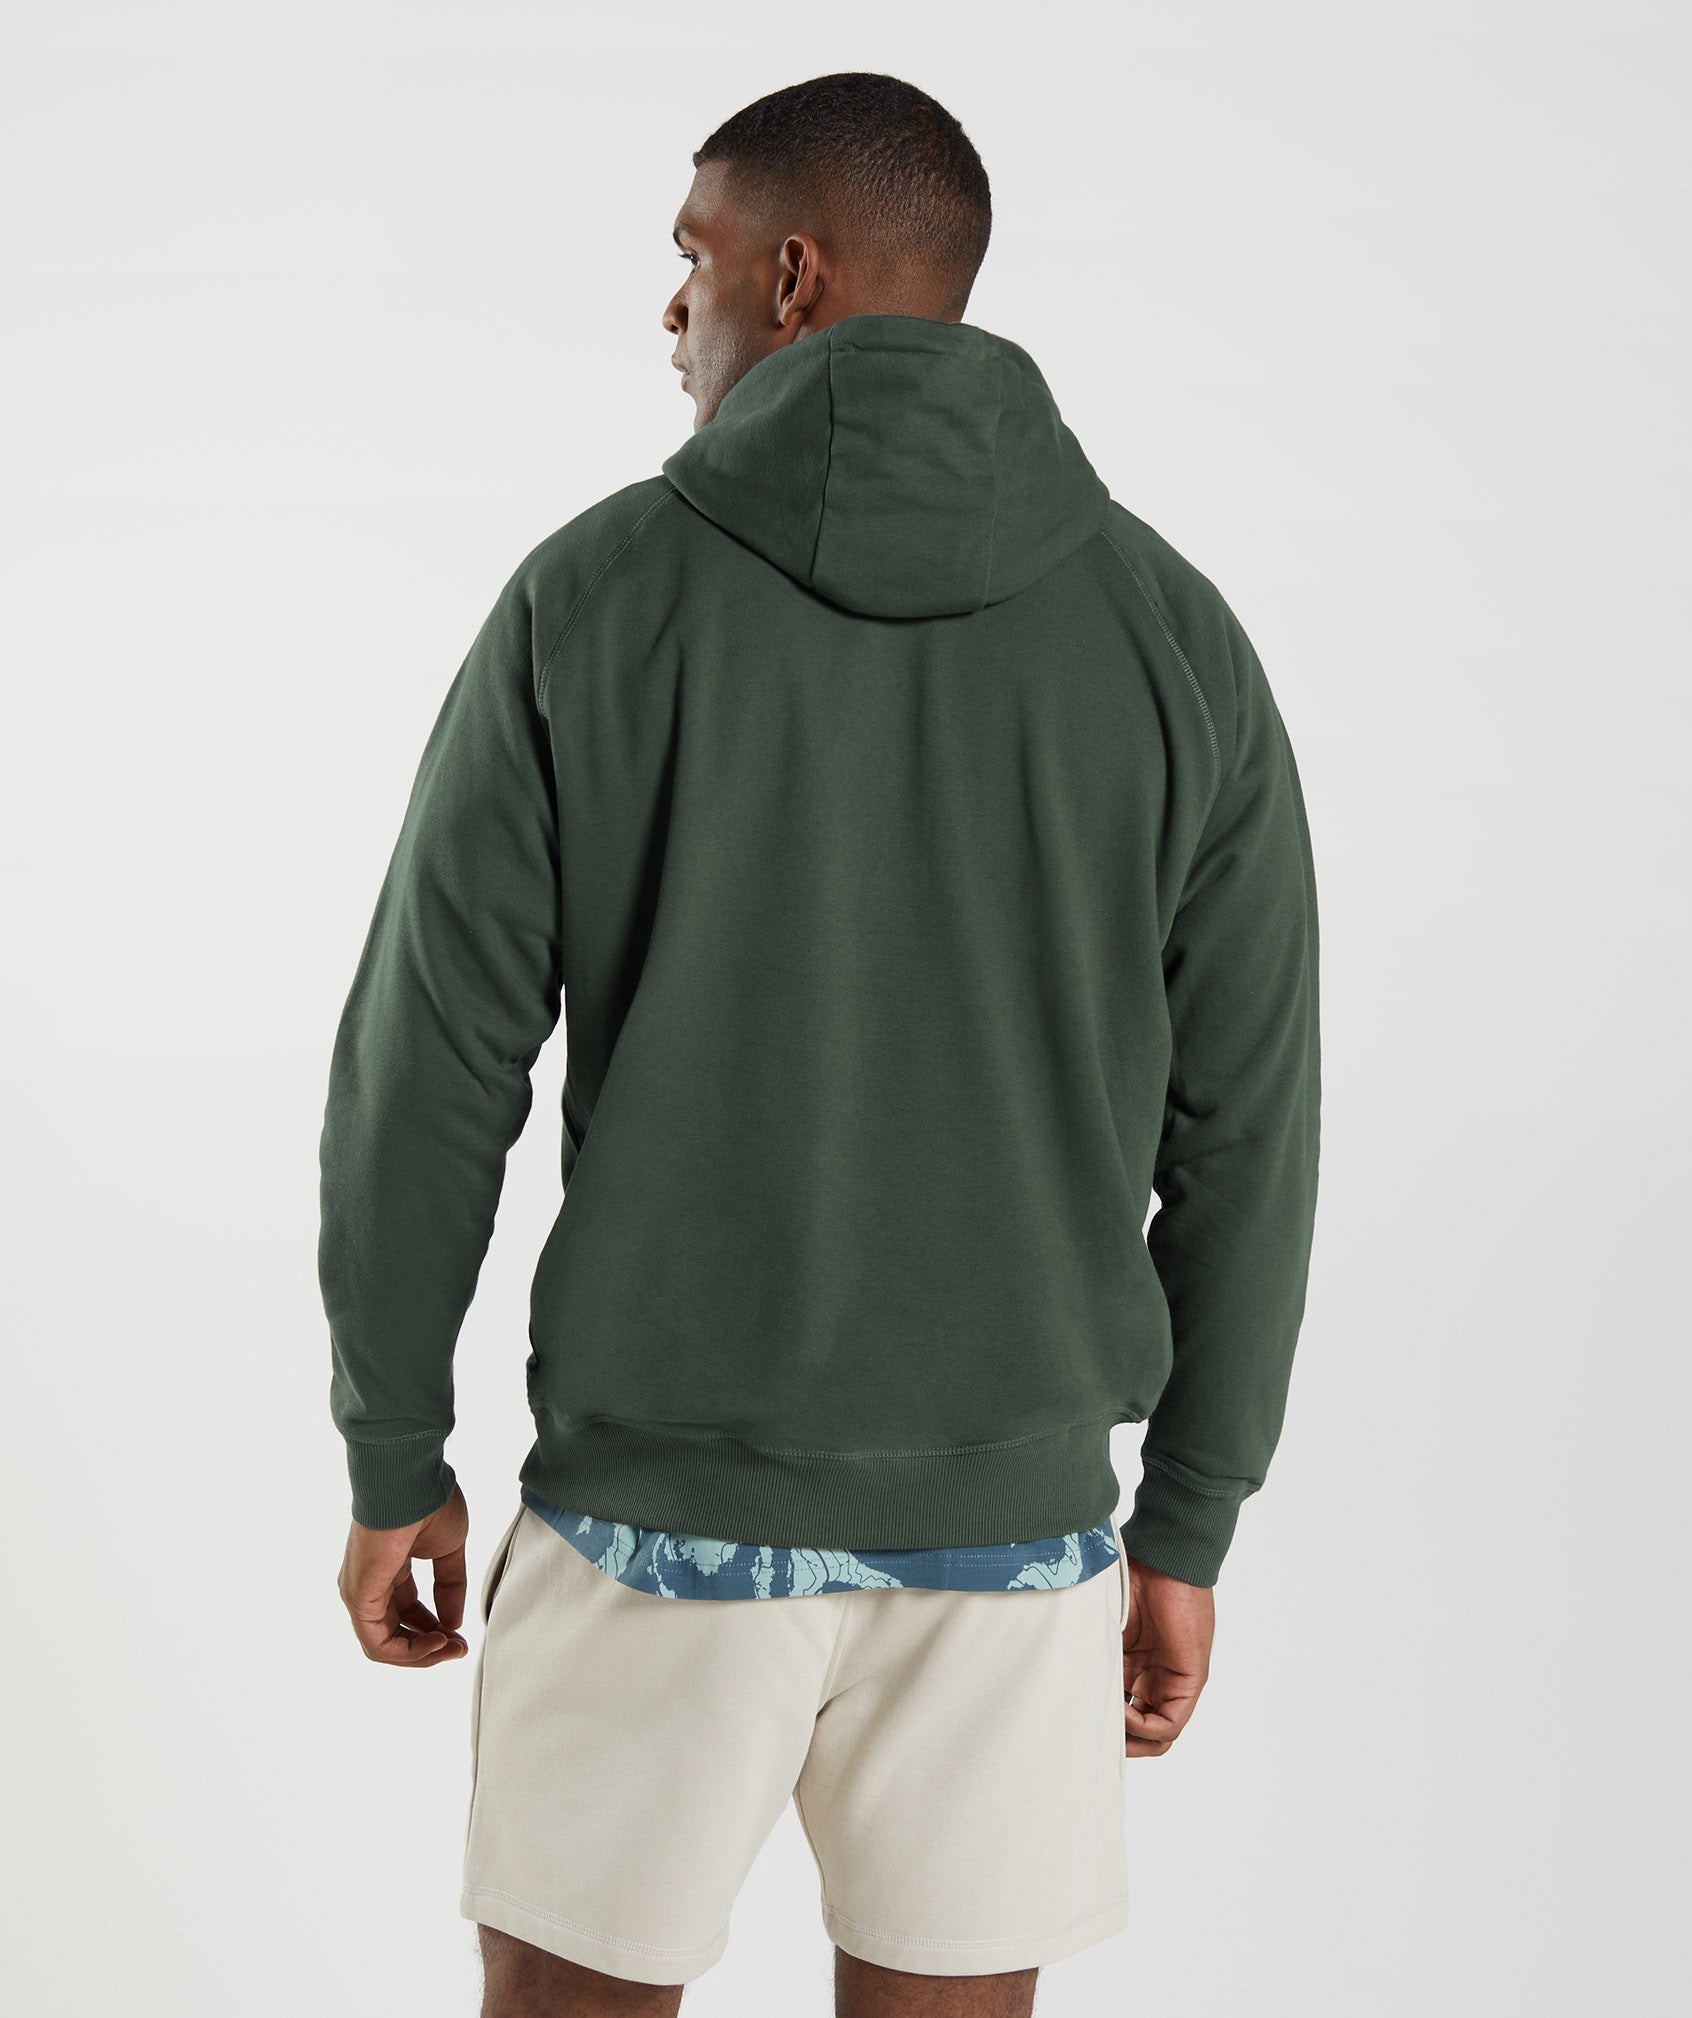 Apollo Hoodie in Obsidian Green - view 2